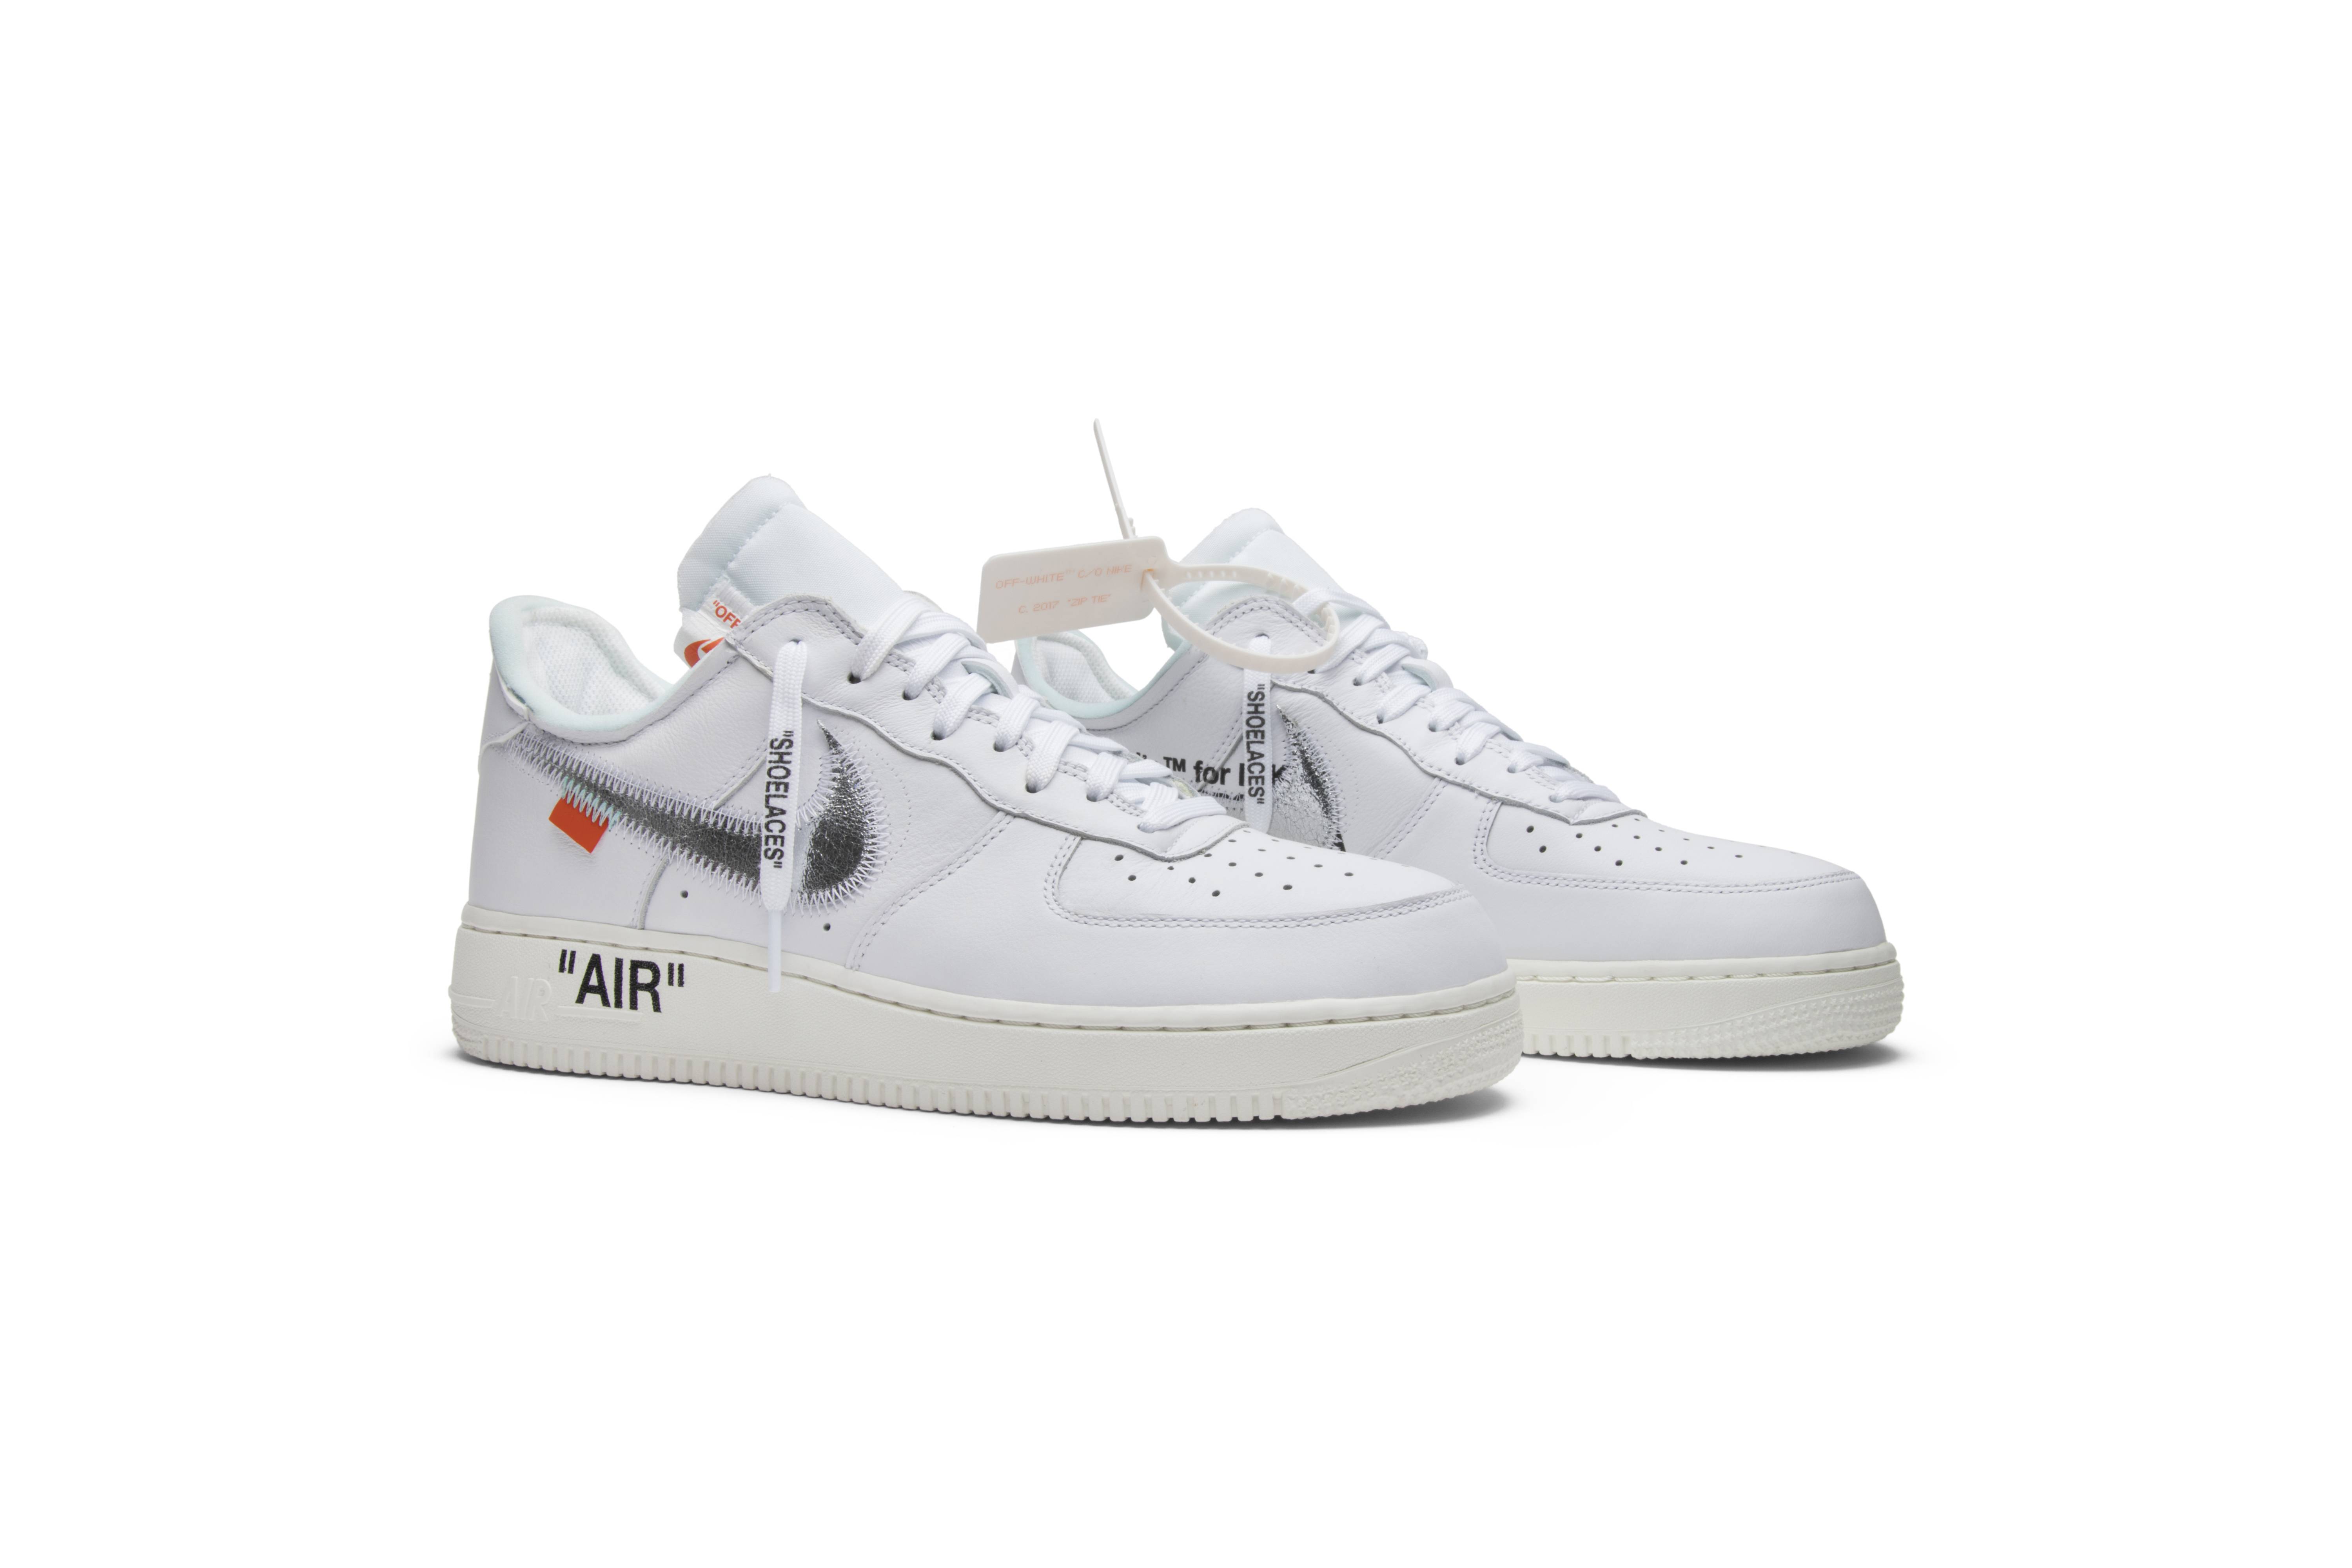 off white nike air force 1 complexcon